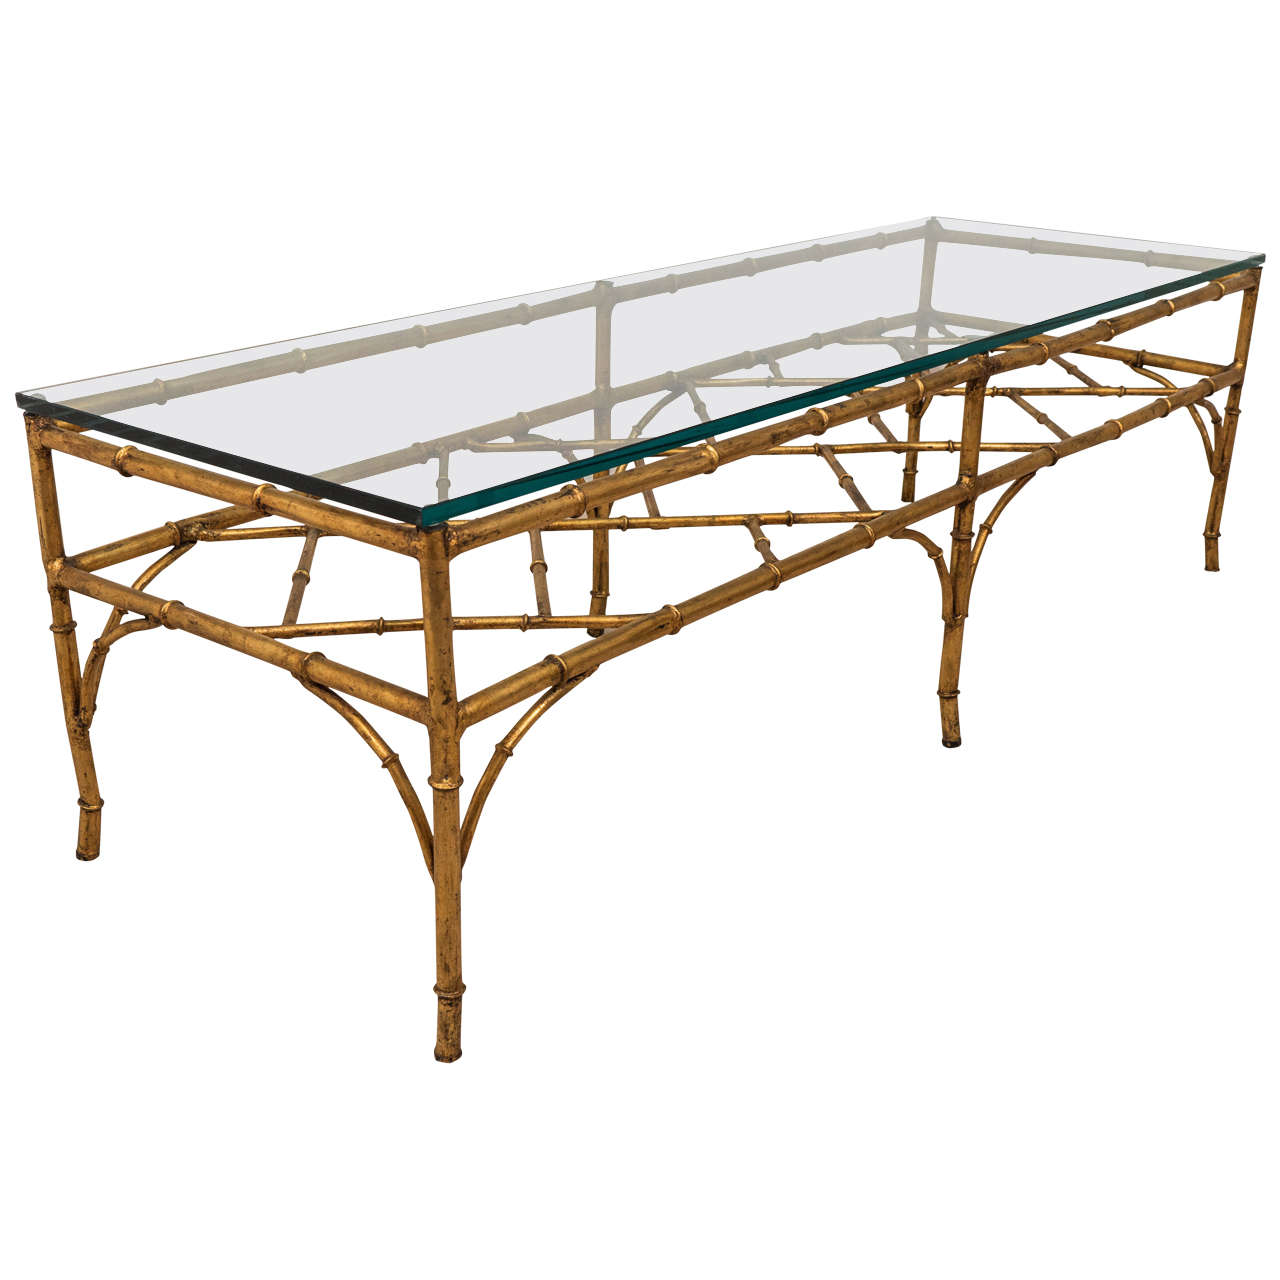 A Midcentury Faux Bamboo Gilded Metal Coffee Table with Bracket Stretcher